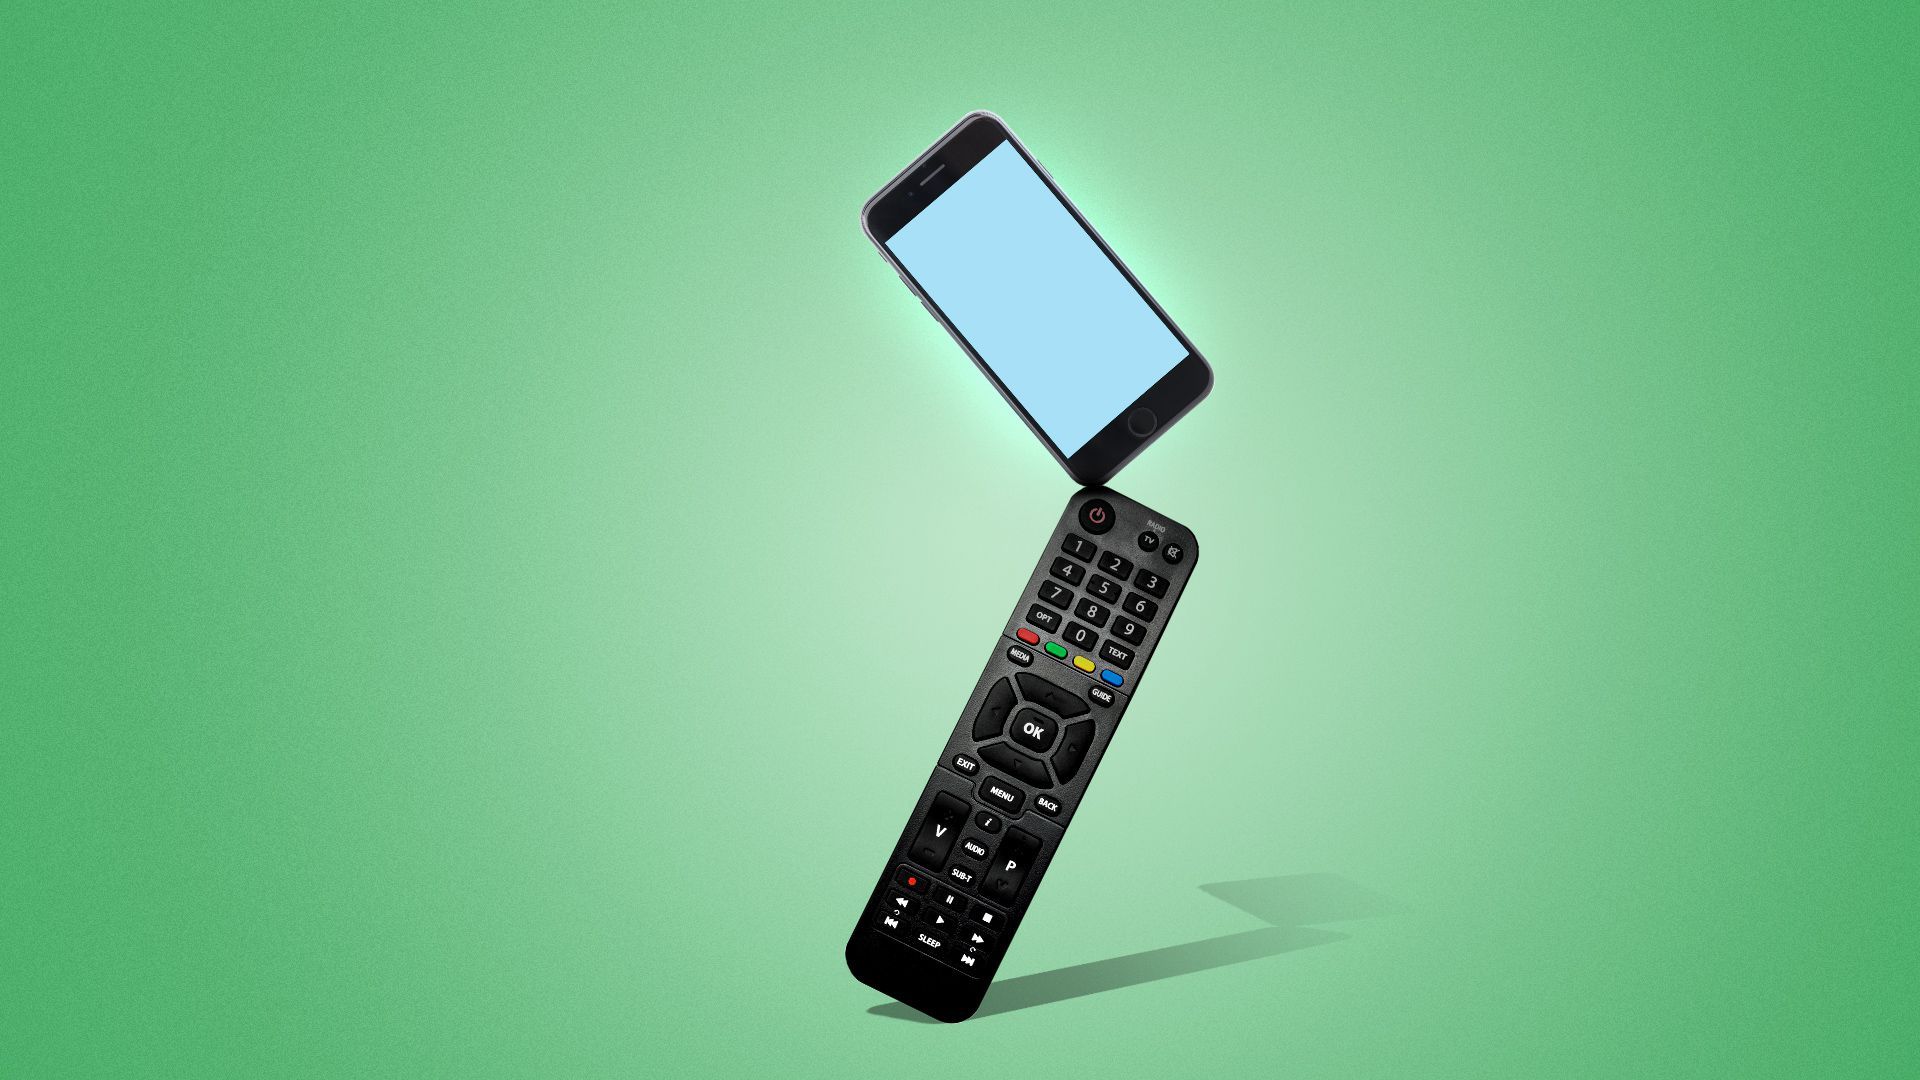 Illustration of a cell phone and a remote control balancing like a cairn